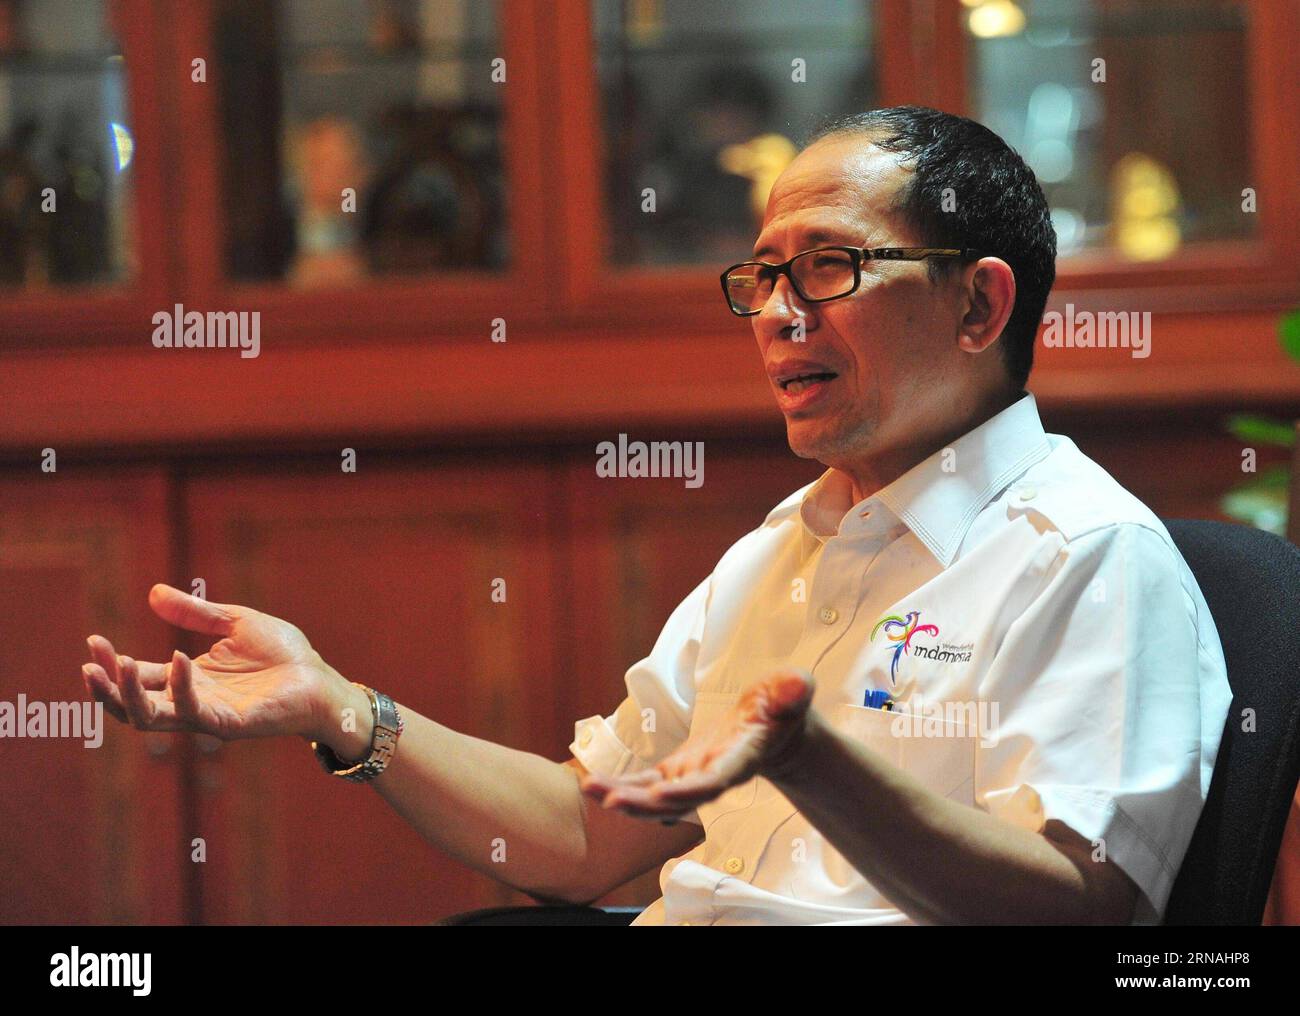 (160127) -- JAKARTA, Jan. 27, 2016 -- Deputy for Overseas Promotion of the Indonesian Tourism Ministry I Gde Pitana speaks during a special interview in Jakarta, Indonesia, Jan. 27, 2016. Indonesia expects the arrivals of holiday makers from China to jump this year as it has offered special historical destinations, boosted supportive policy and stepped up promotion, a senior tourism official said here Wednesday. ) INDONESIA-JAKARTA-CHINA-TOURISM Zulkarnain PUBLICATIONxNOTxINxCHN   160127 Jakarta Jan 27 2016 Deputy for Overseas Promotion of The Indonesian Tourism Ministry I Gde  Speaks during a Stock Photo